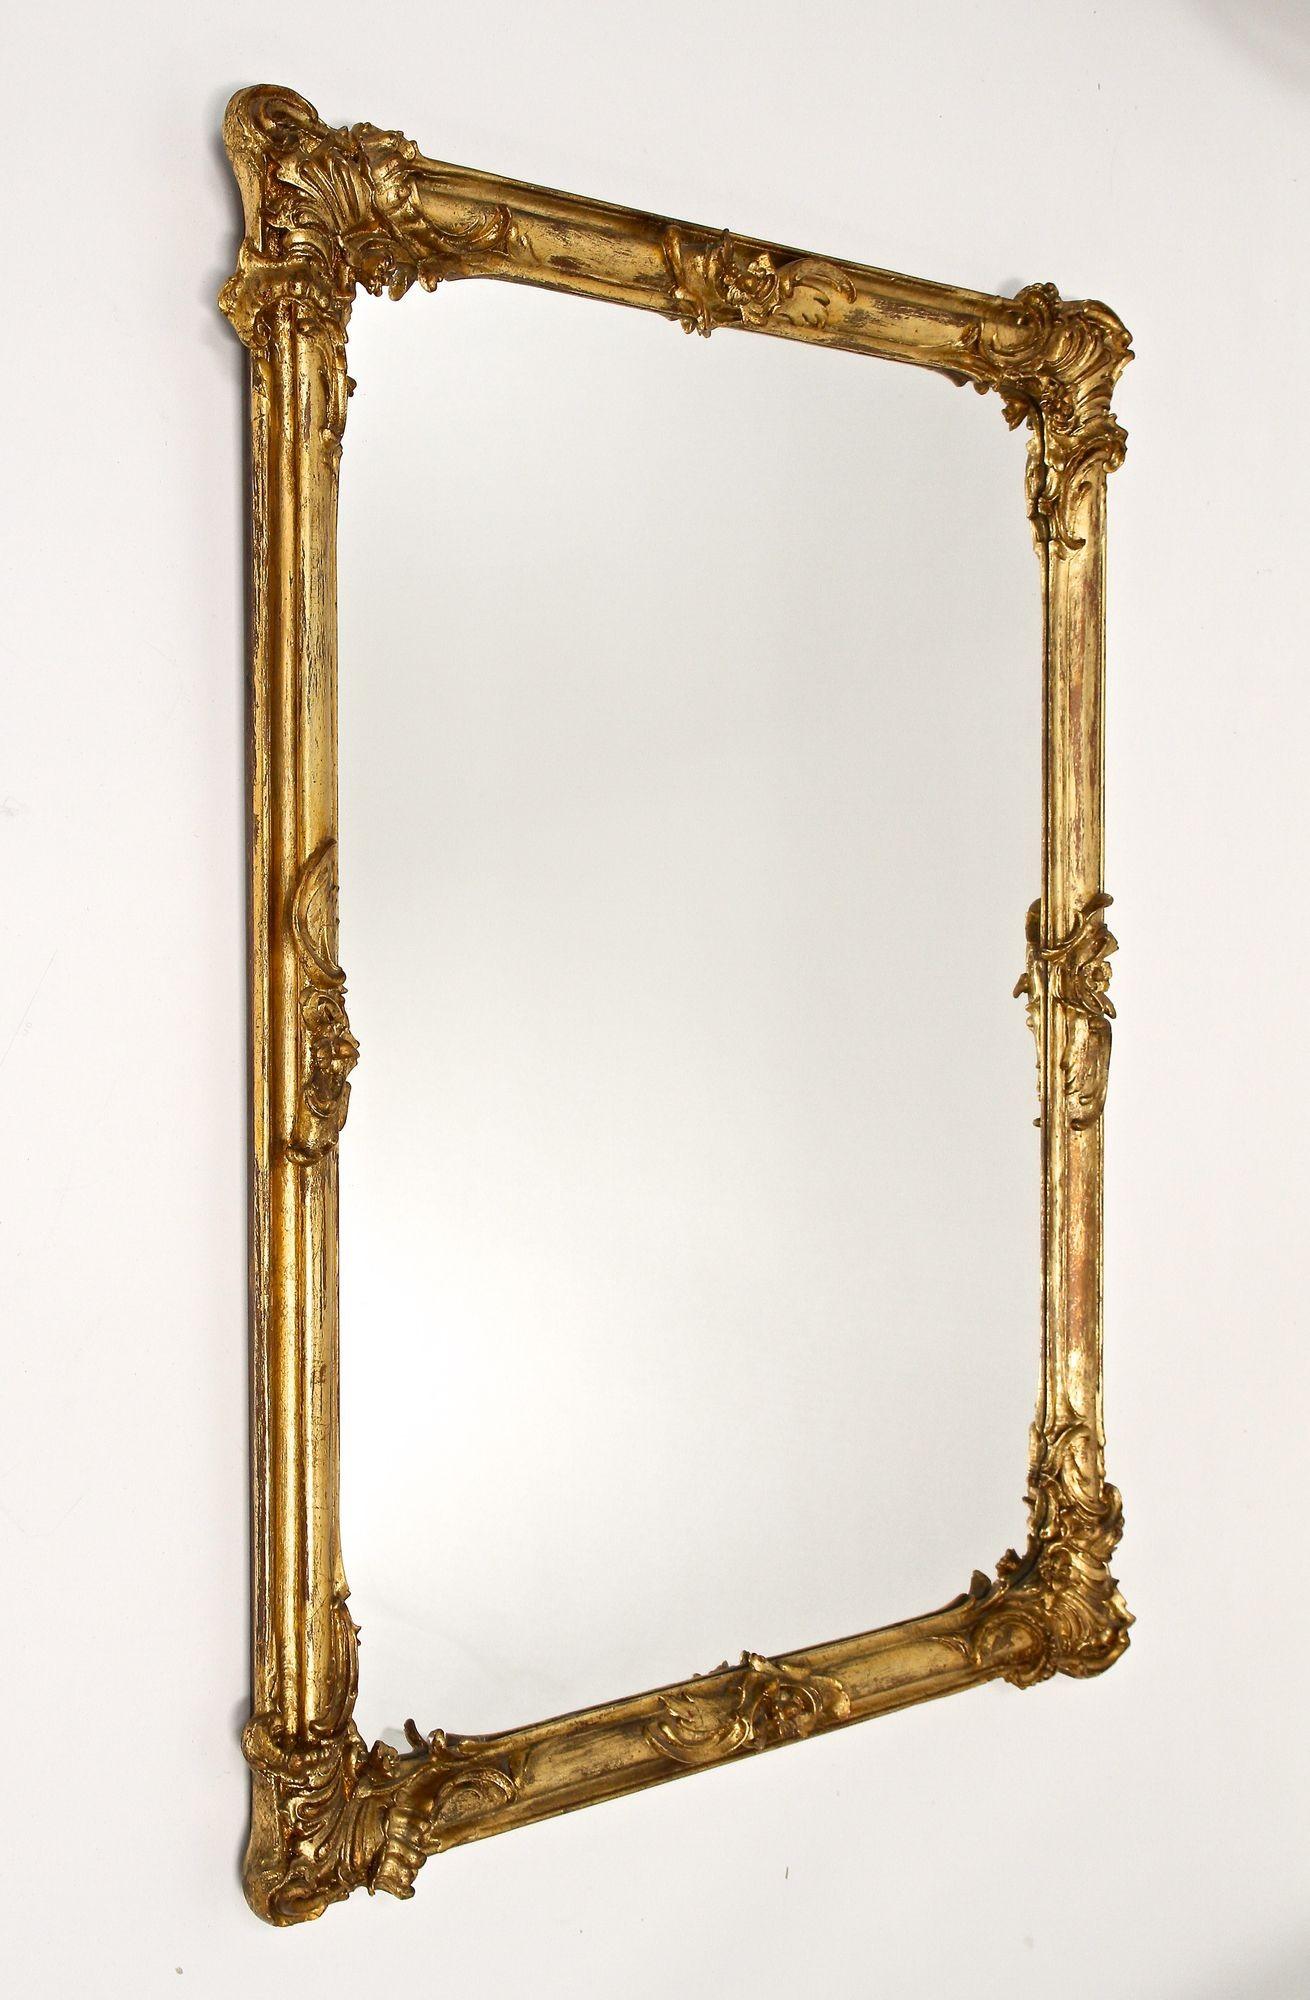 Marvellous 18th century gilt wall mirror from the baroque period around 1780 in Austria. This large, exceptional looking mirror was part of a private owned castle and comes in amazing old restored condition: we just had to carefully clean the frame